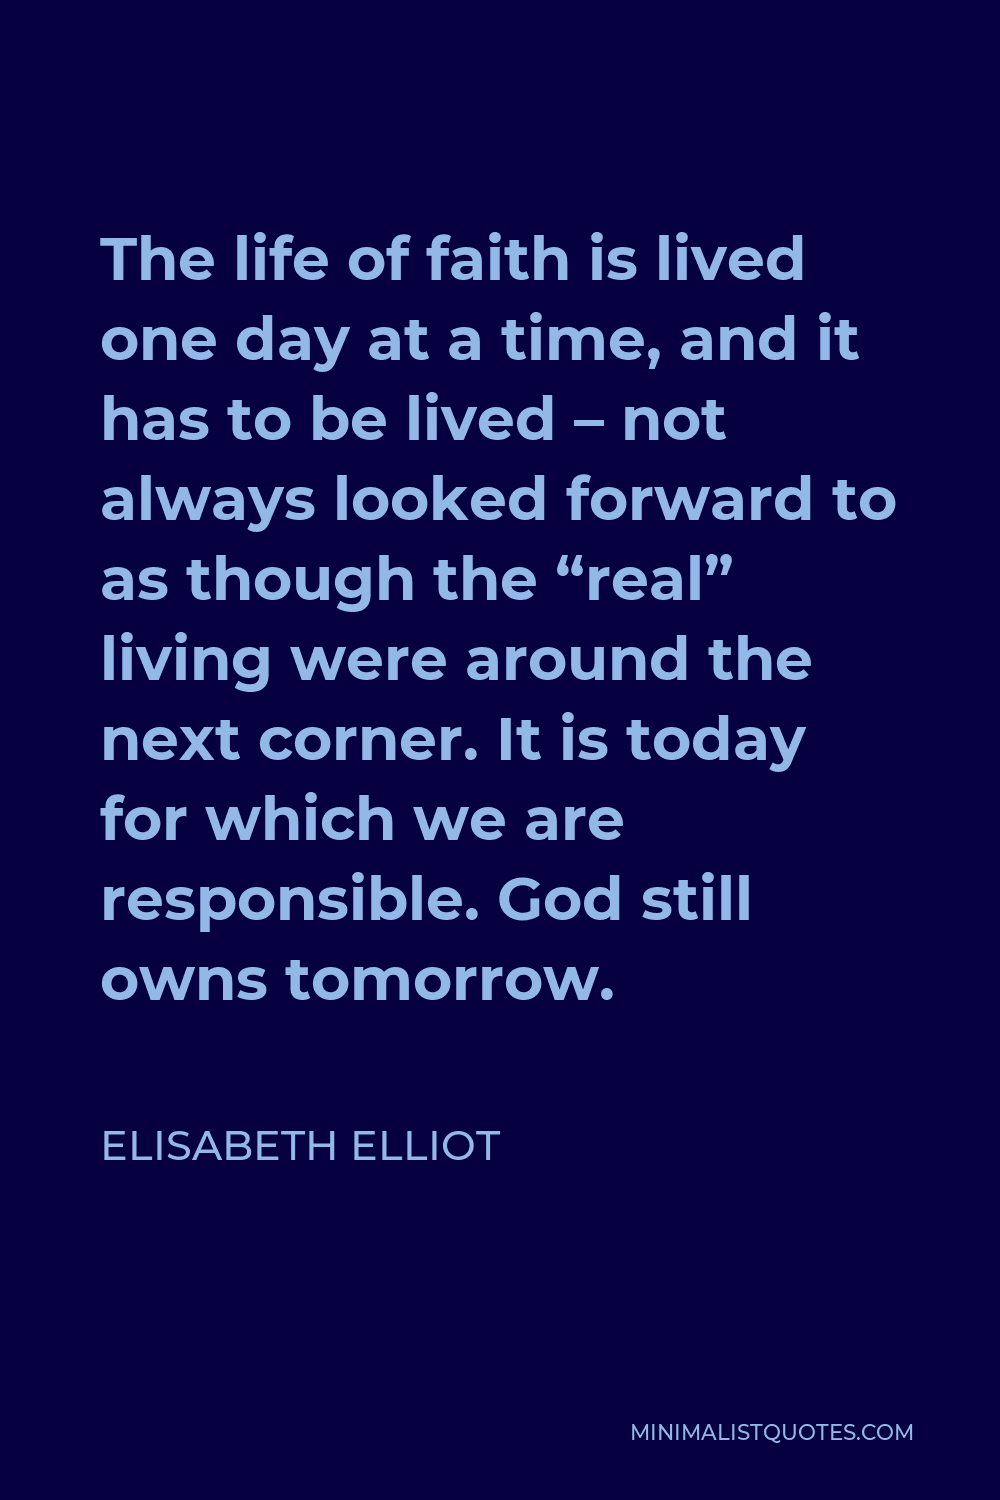 Elisabeth Elliot Quote - The life of faith is lived one day at a time, and it has to be lived – not always looked forward to as though the “real” living were around the next corner. It is today for which we are responsible. God still owns tomorrow.